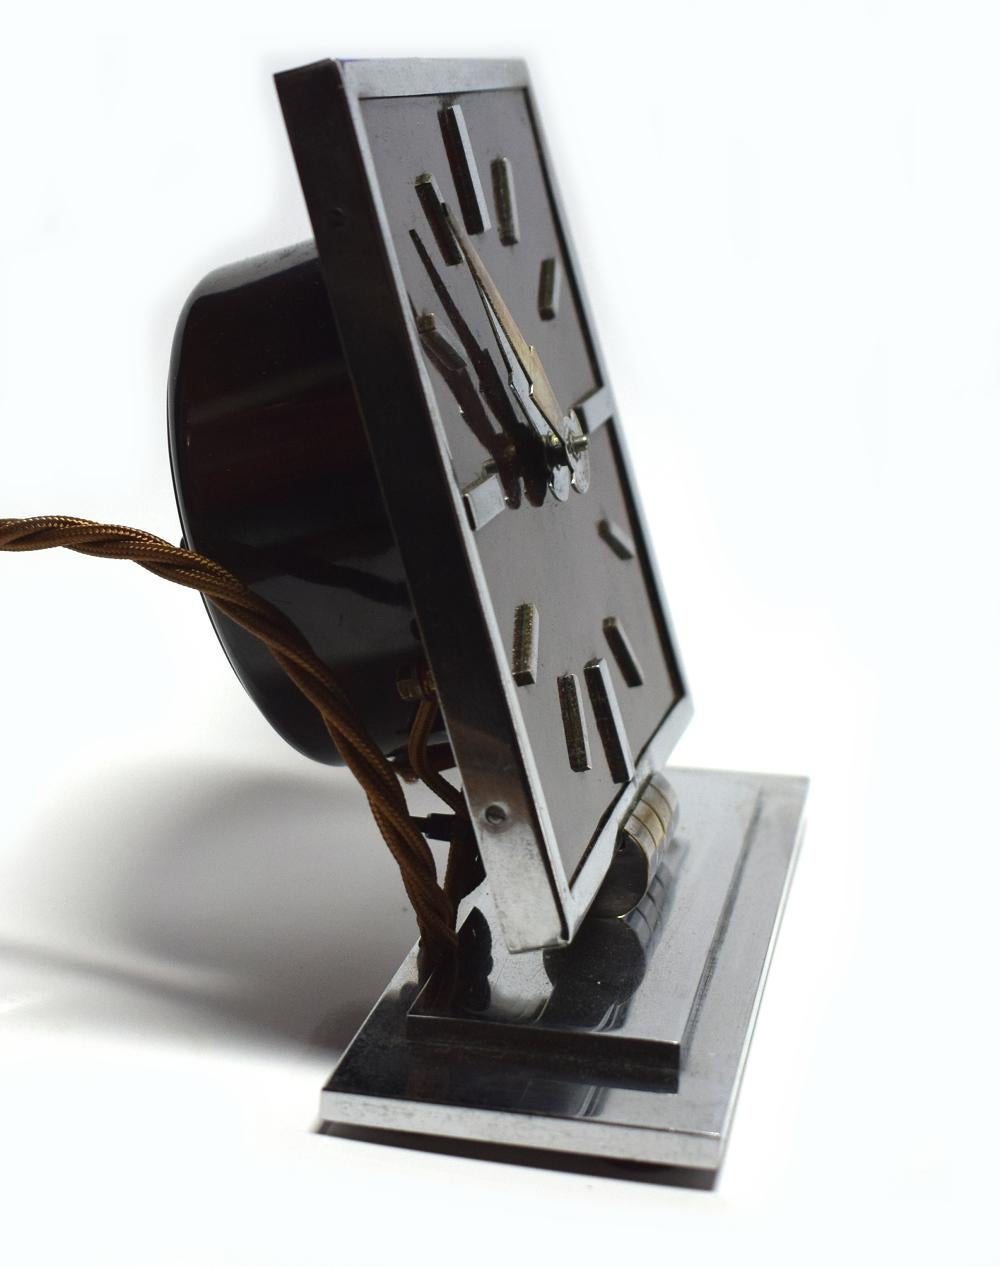 Art Deco Modernist 1930s Chrome and Bakelite Clock In Good Condition For Sale In Devon, England